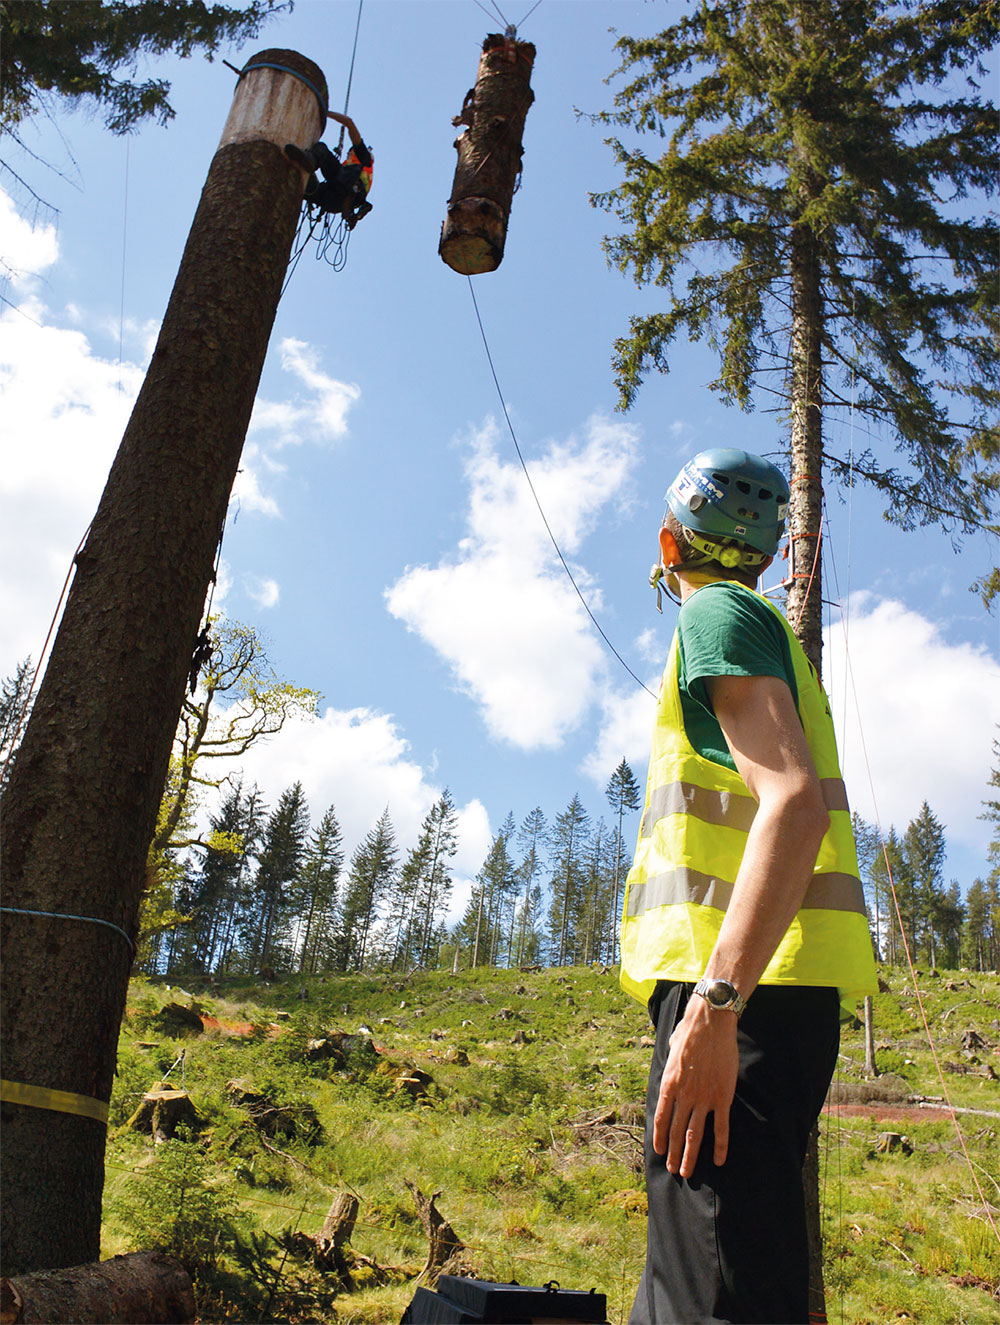 Lifting and resetting the test mass. The climber and mass were anchored with two fully independent systems. (Photo: Treemagineers Ltd)